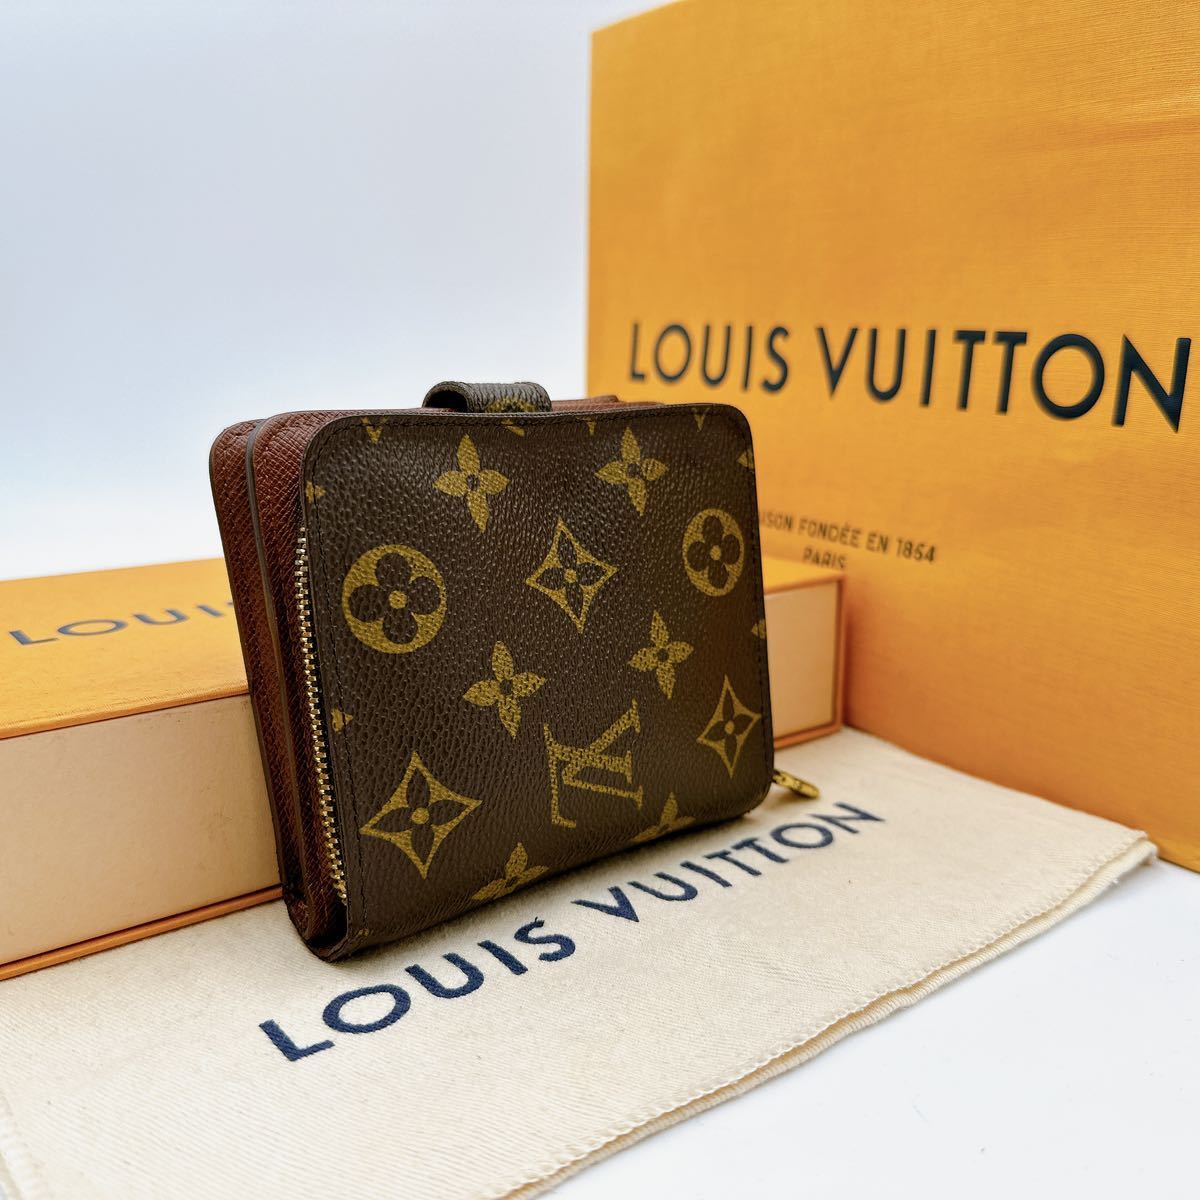 A2333【極美品】LOUIS VUITTON ルイヴィトン モノグラム コンパクト